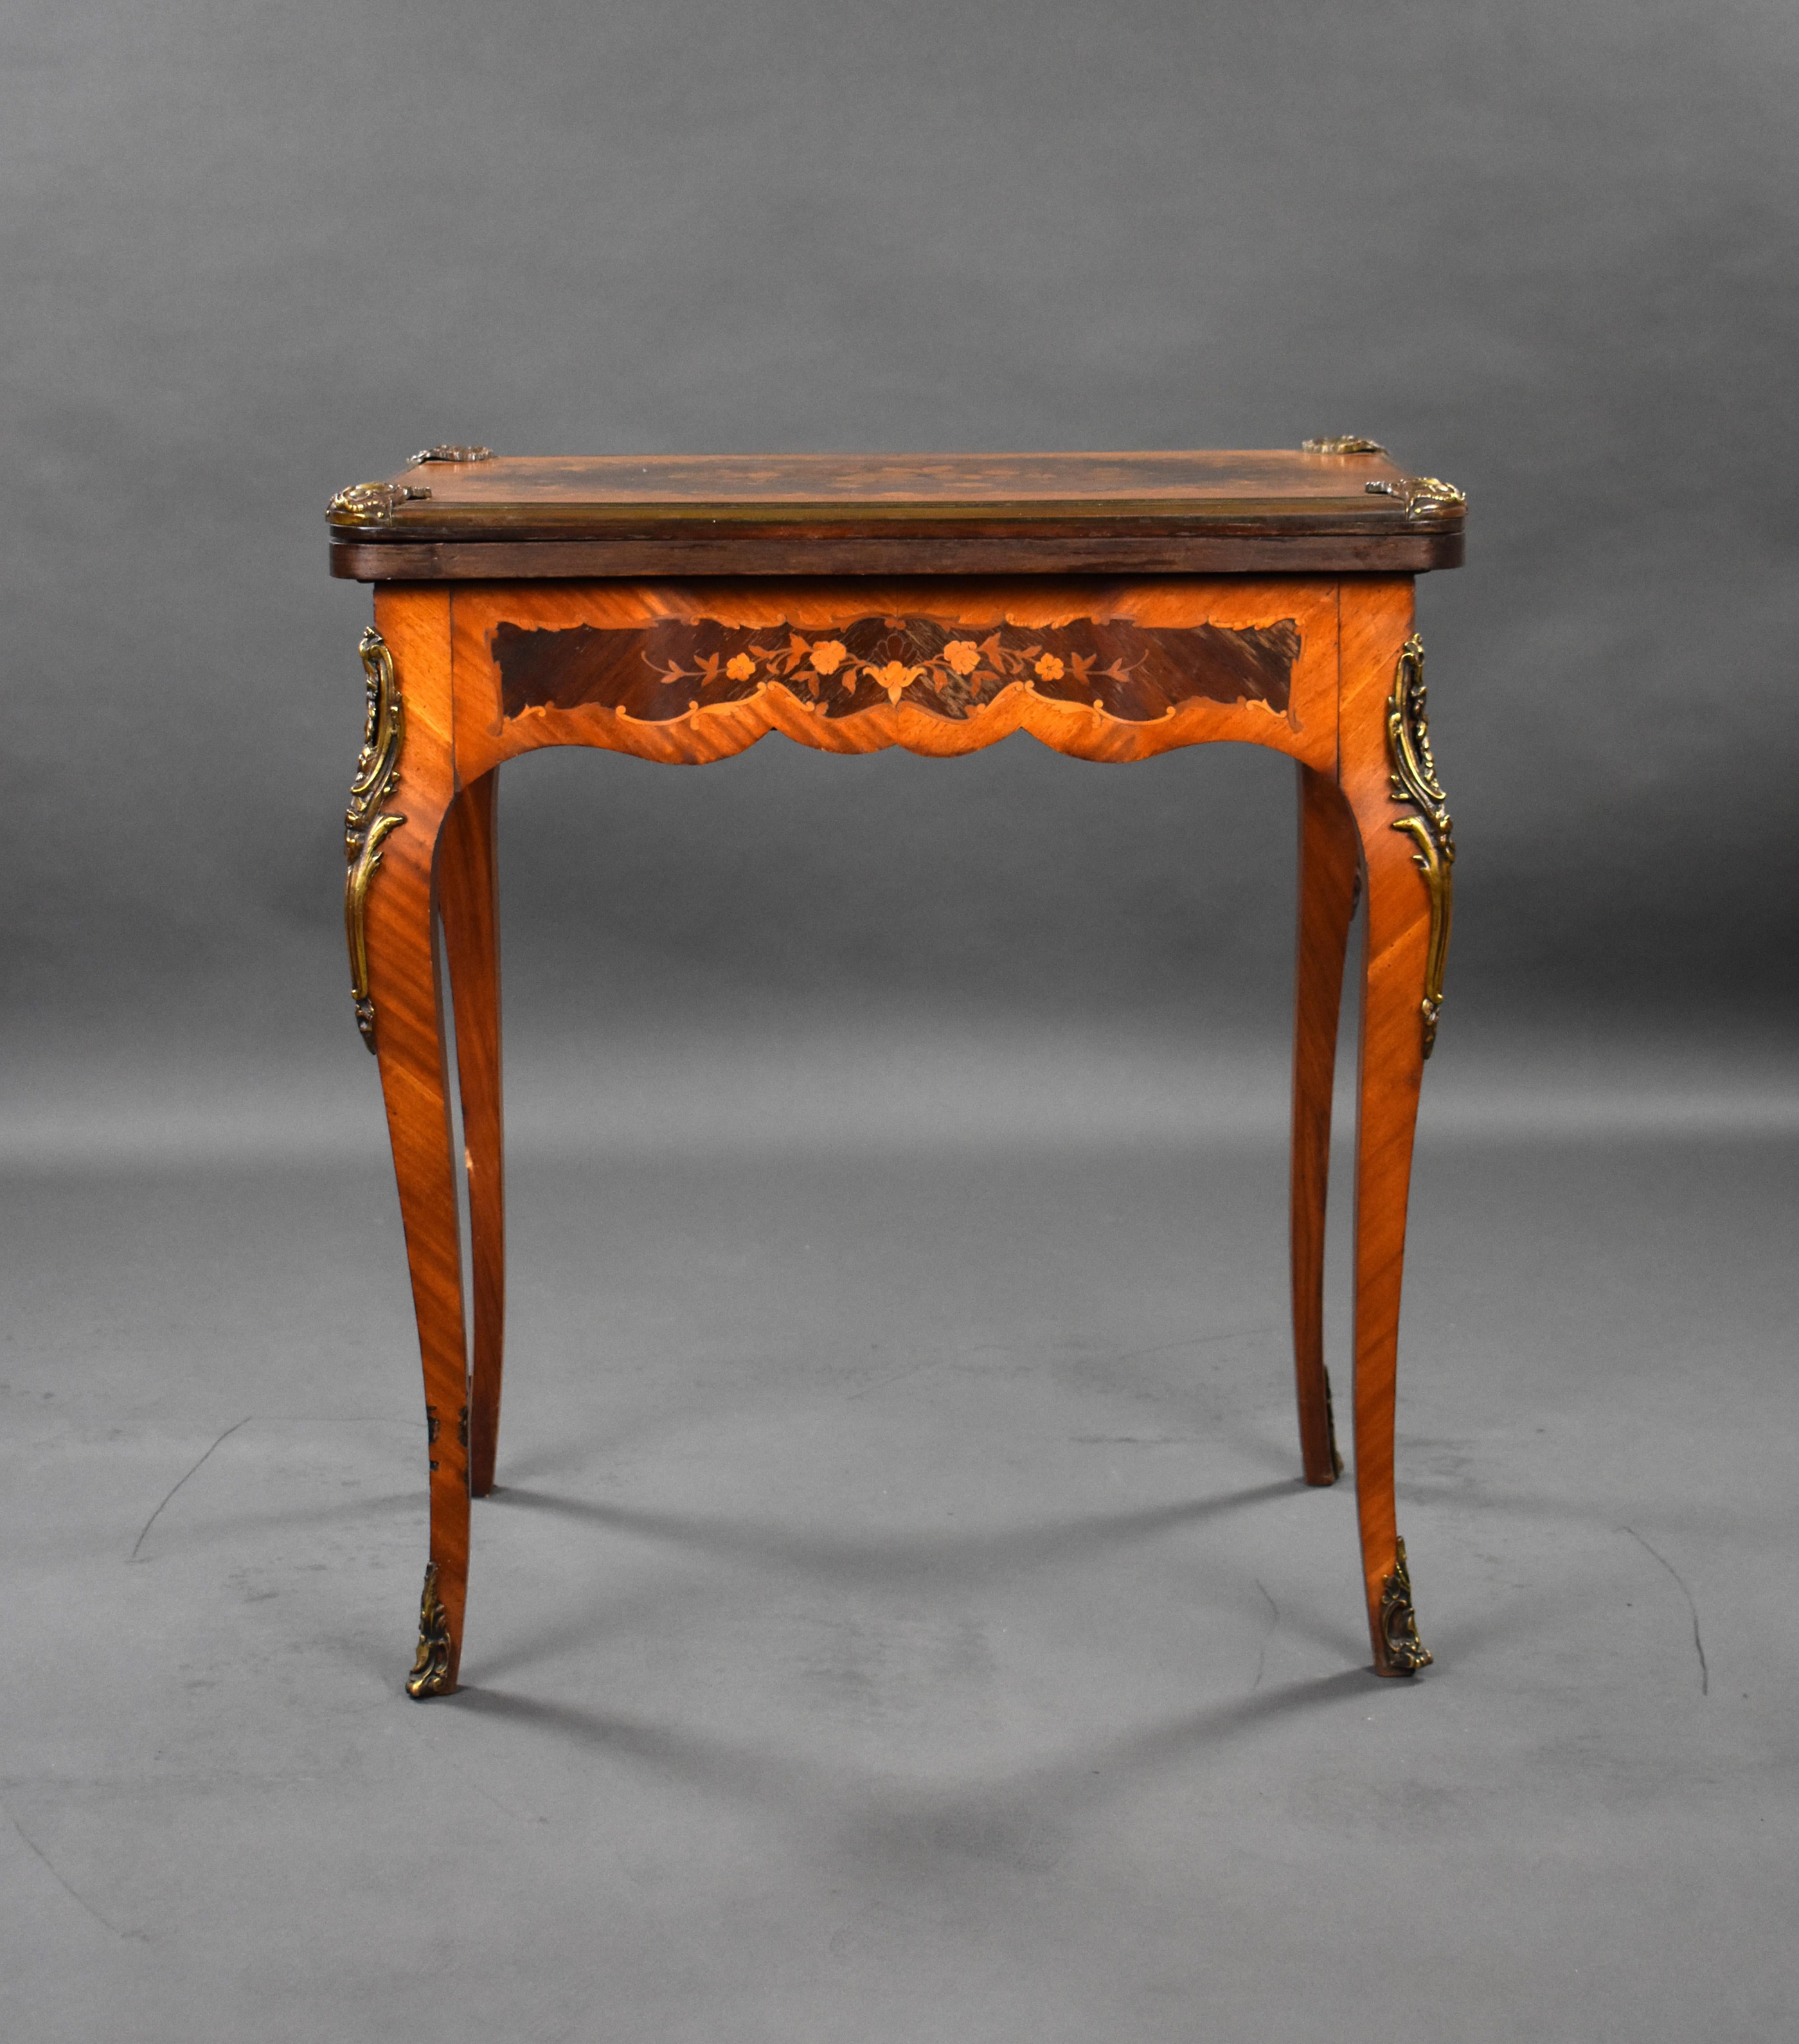 19th Century English Victorian Walnut & Marquetry Card Table & Vanity For Sale 10